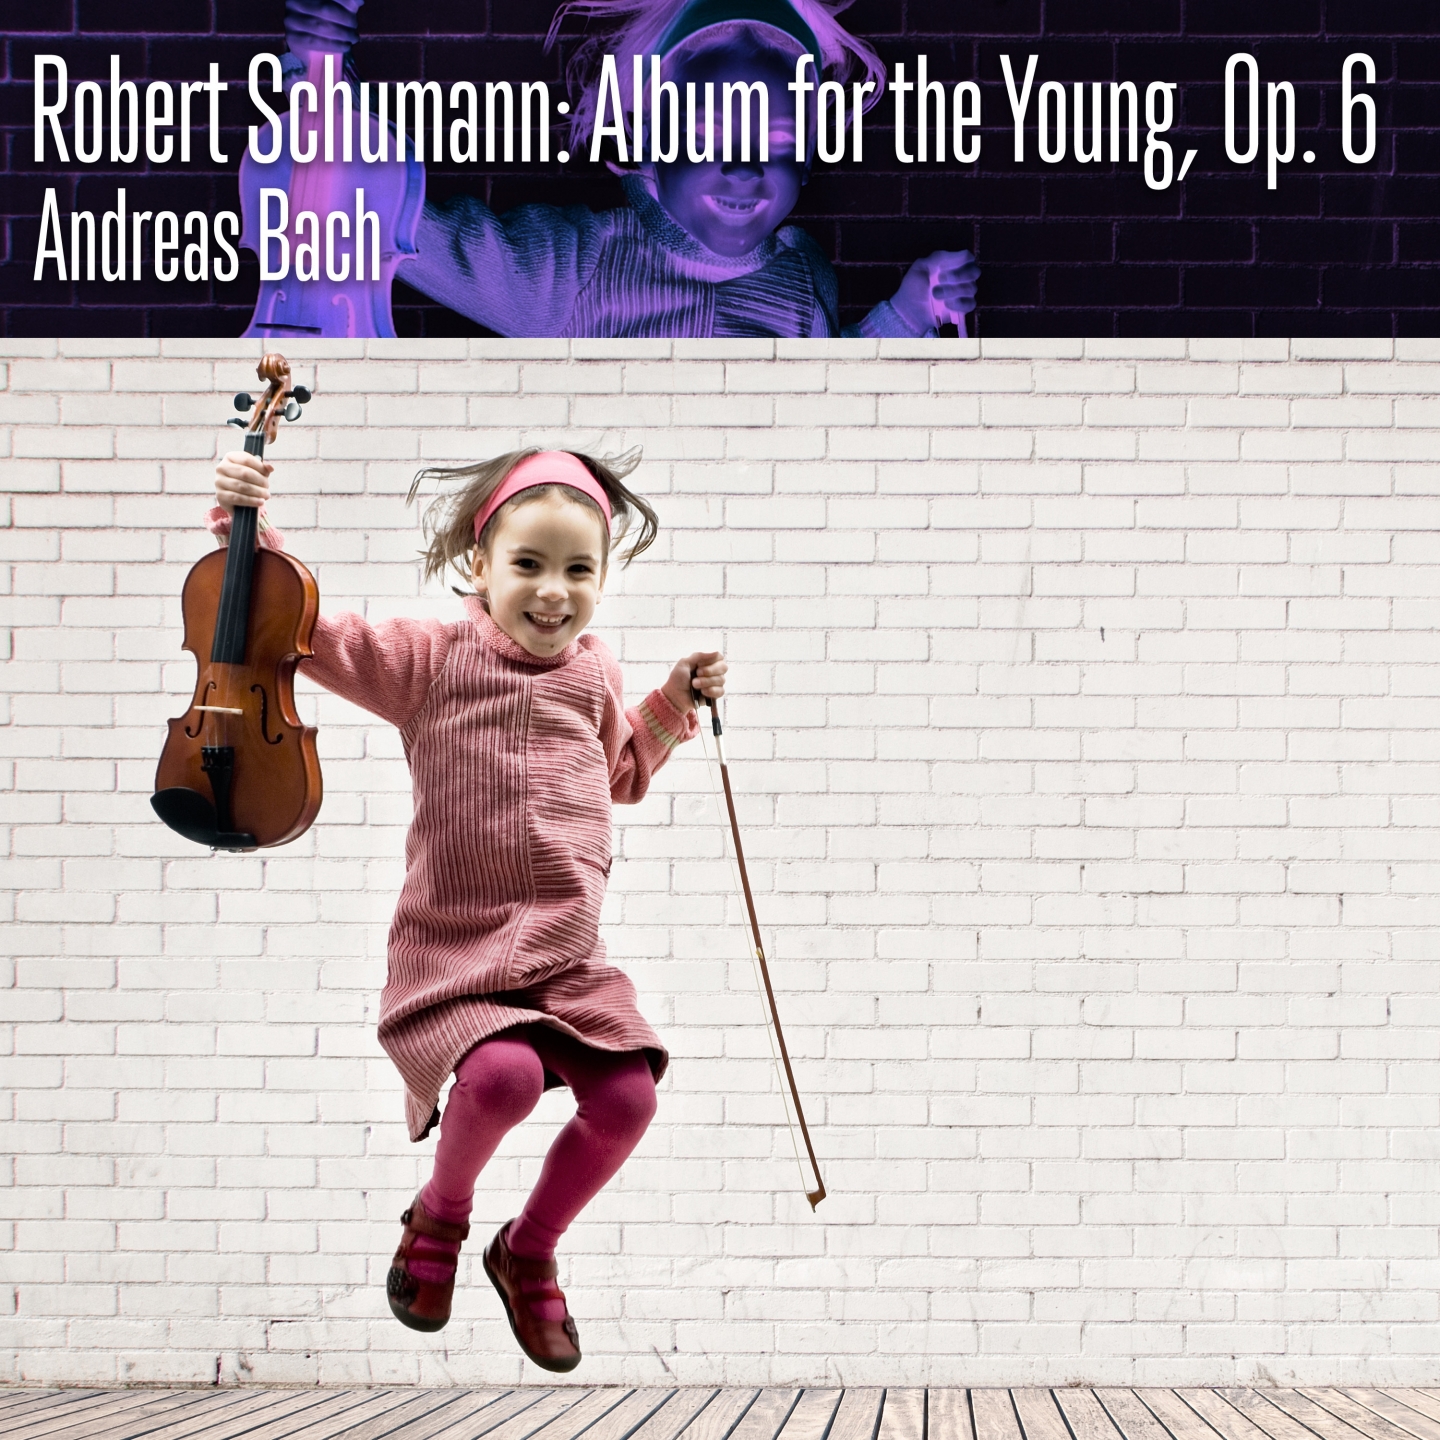 Album for the Young, Op. 68: XXII. Rundgesang